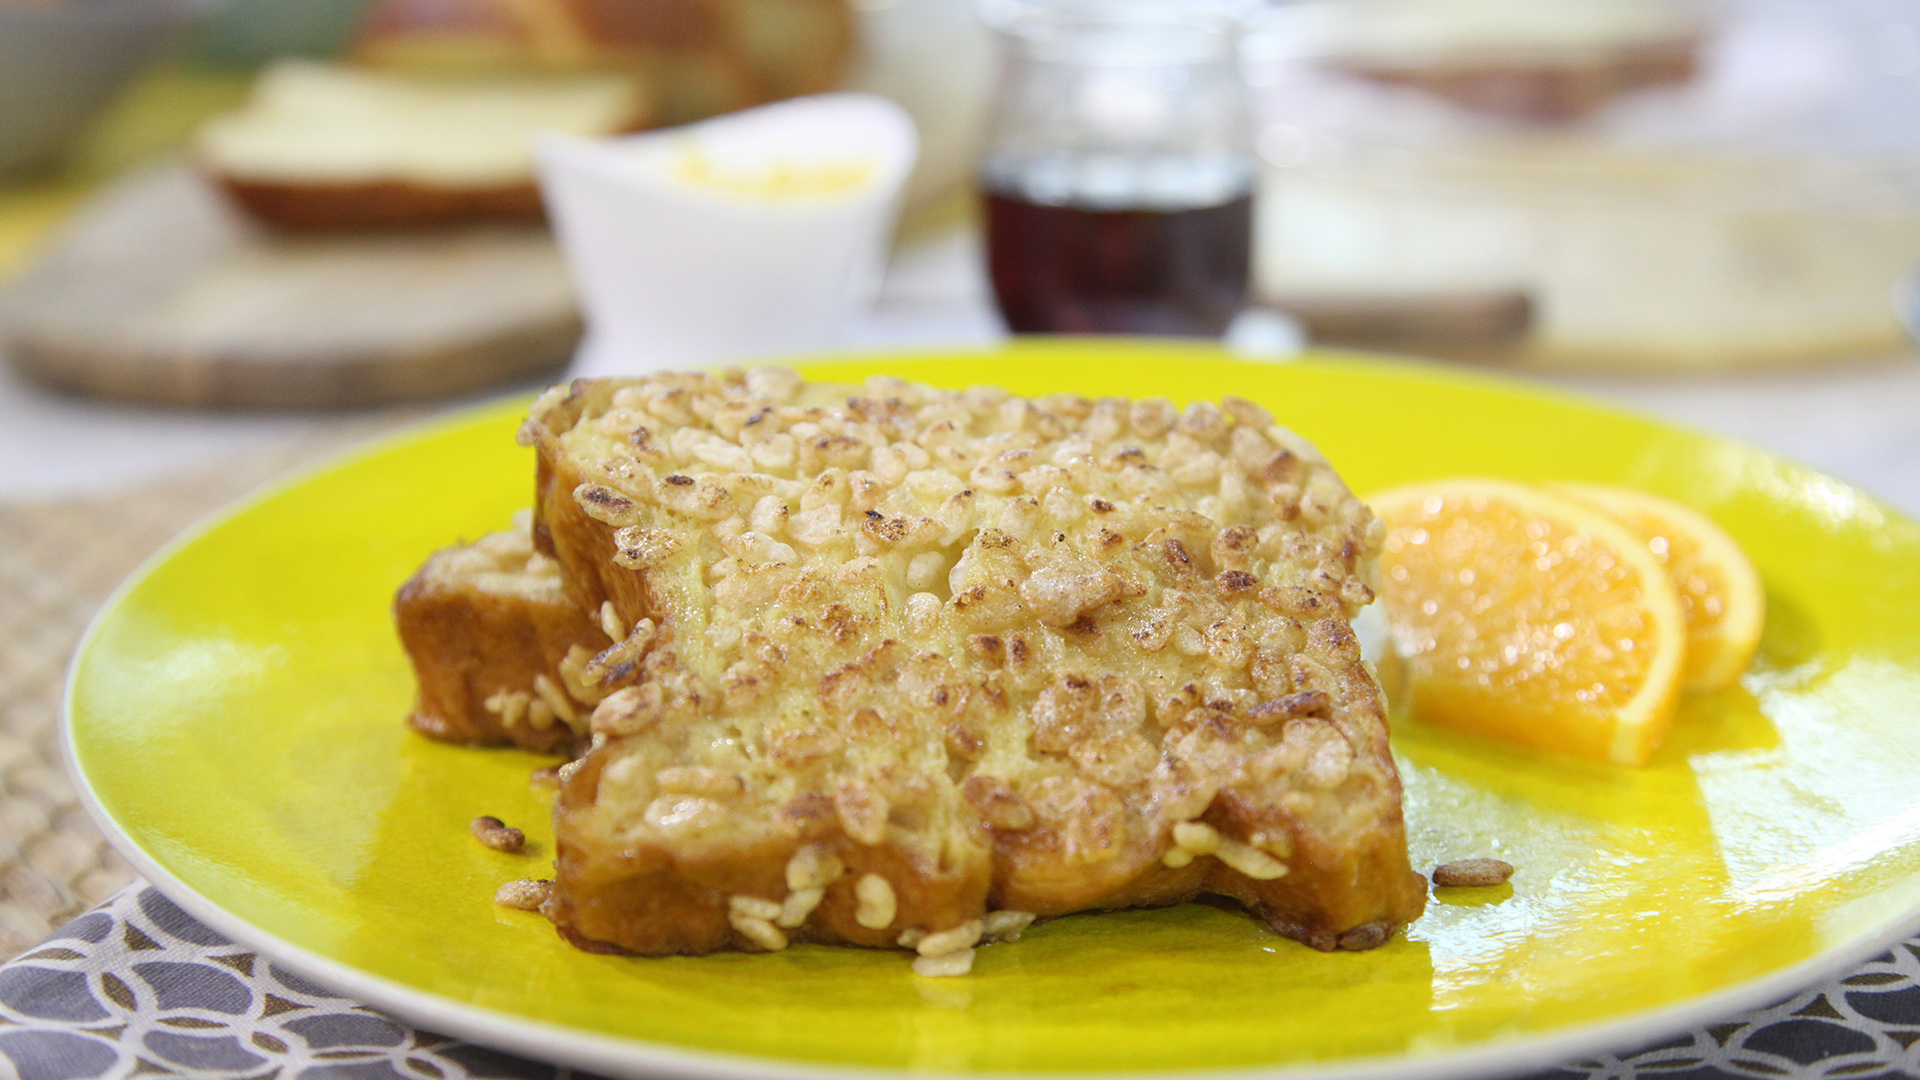 Crispy French toast with maple orange butter